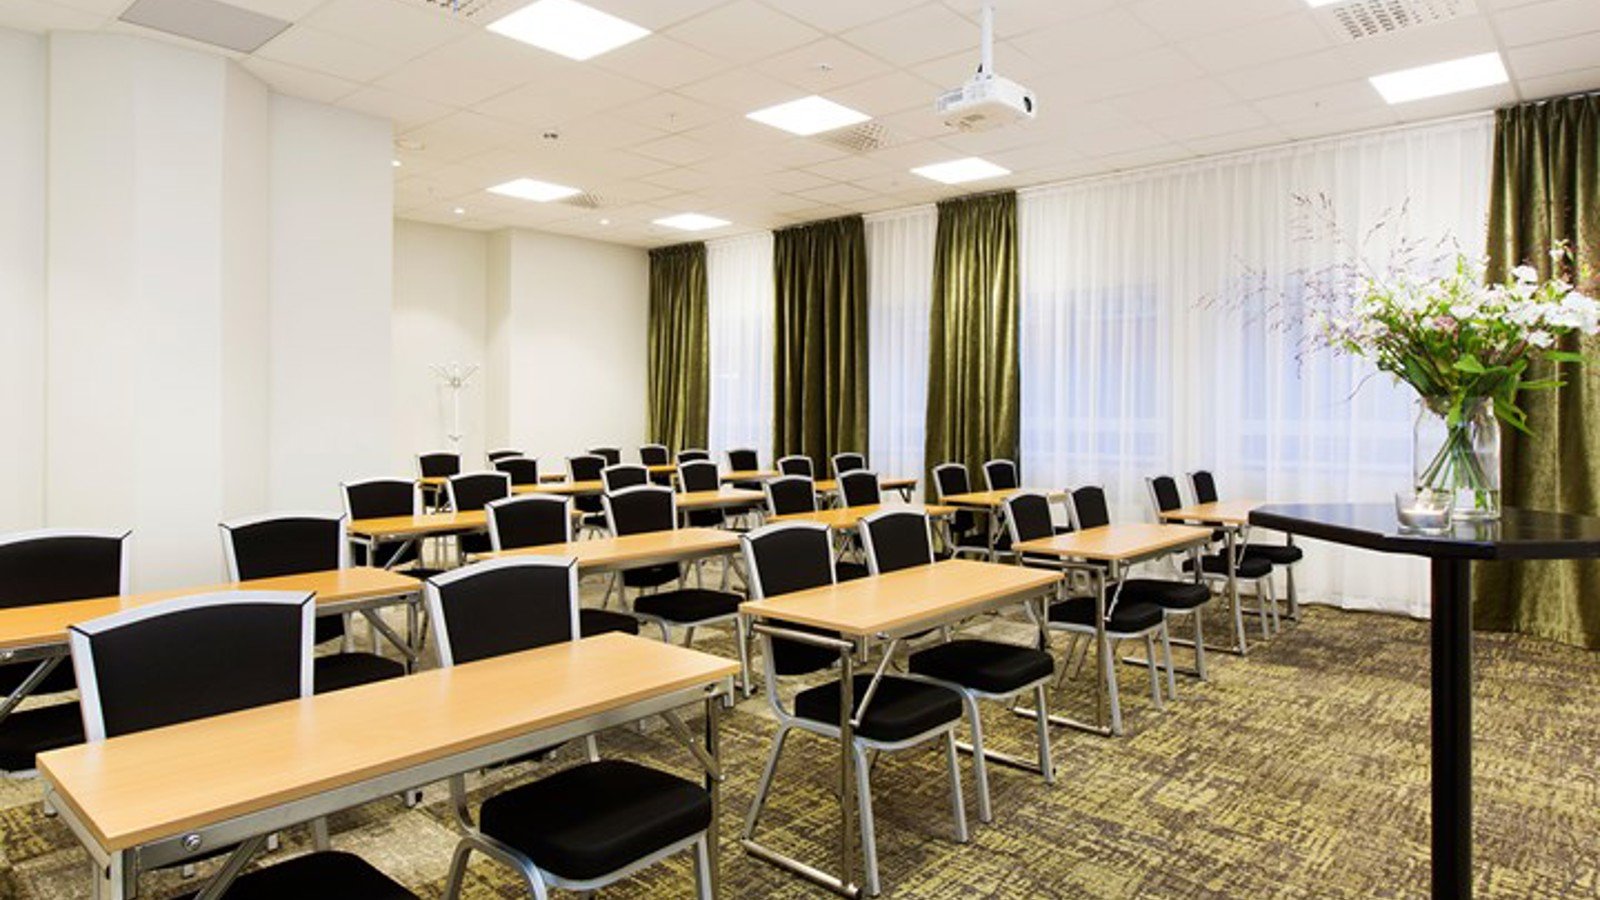 Conference room with school seating, white walls, black chairs, wooden table